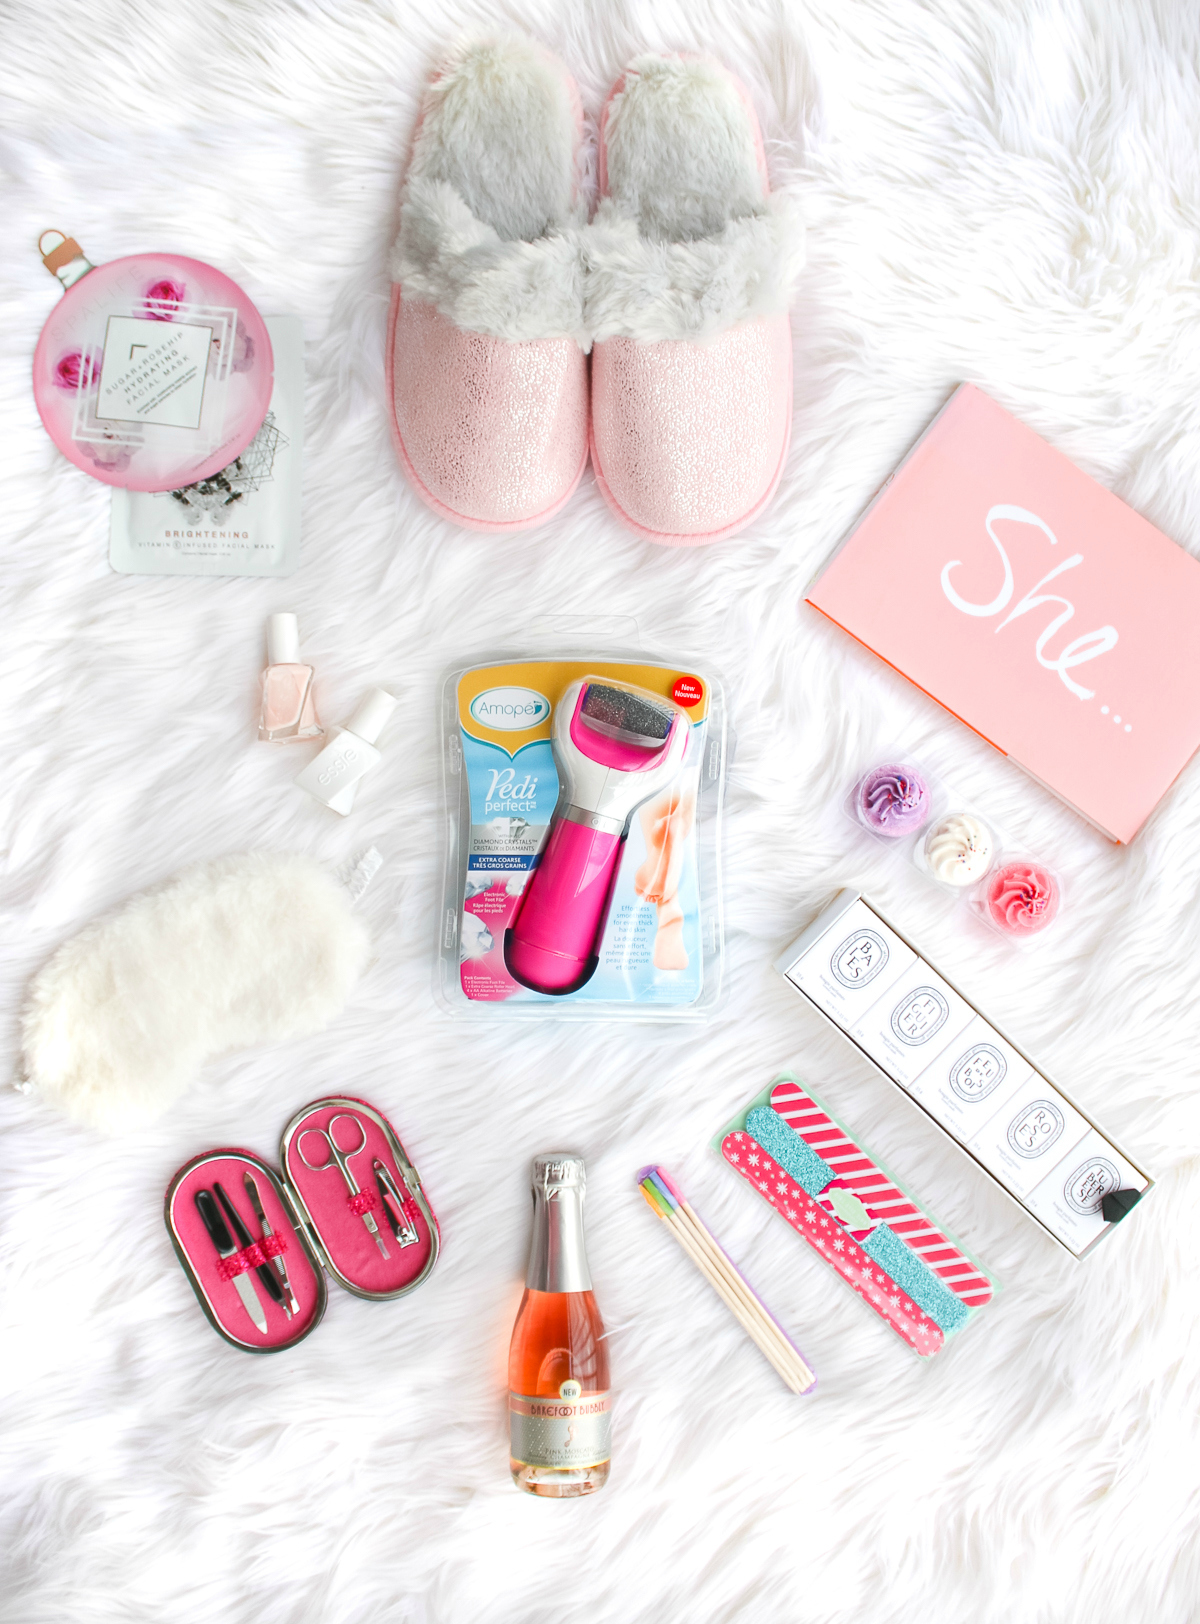 DIY spa gift basket consisting of 12 self care gift ideas she's guaranteed to love, including the Amope Pedi Perfect Foot File, by southern blogger Stephanie Ziajka from Diary of a Debutante